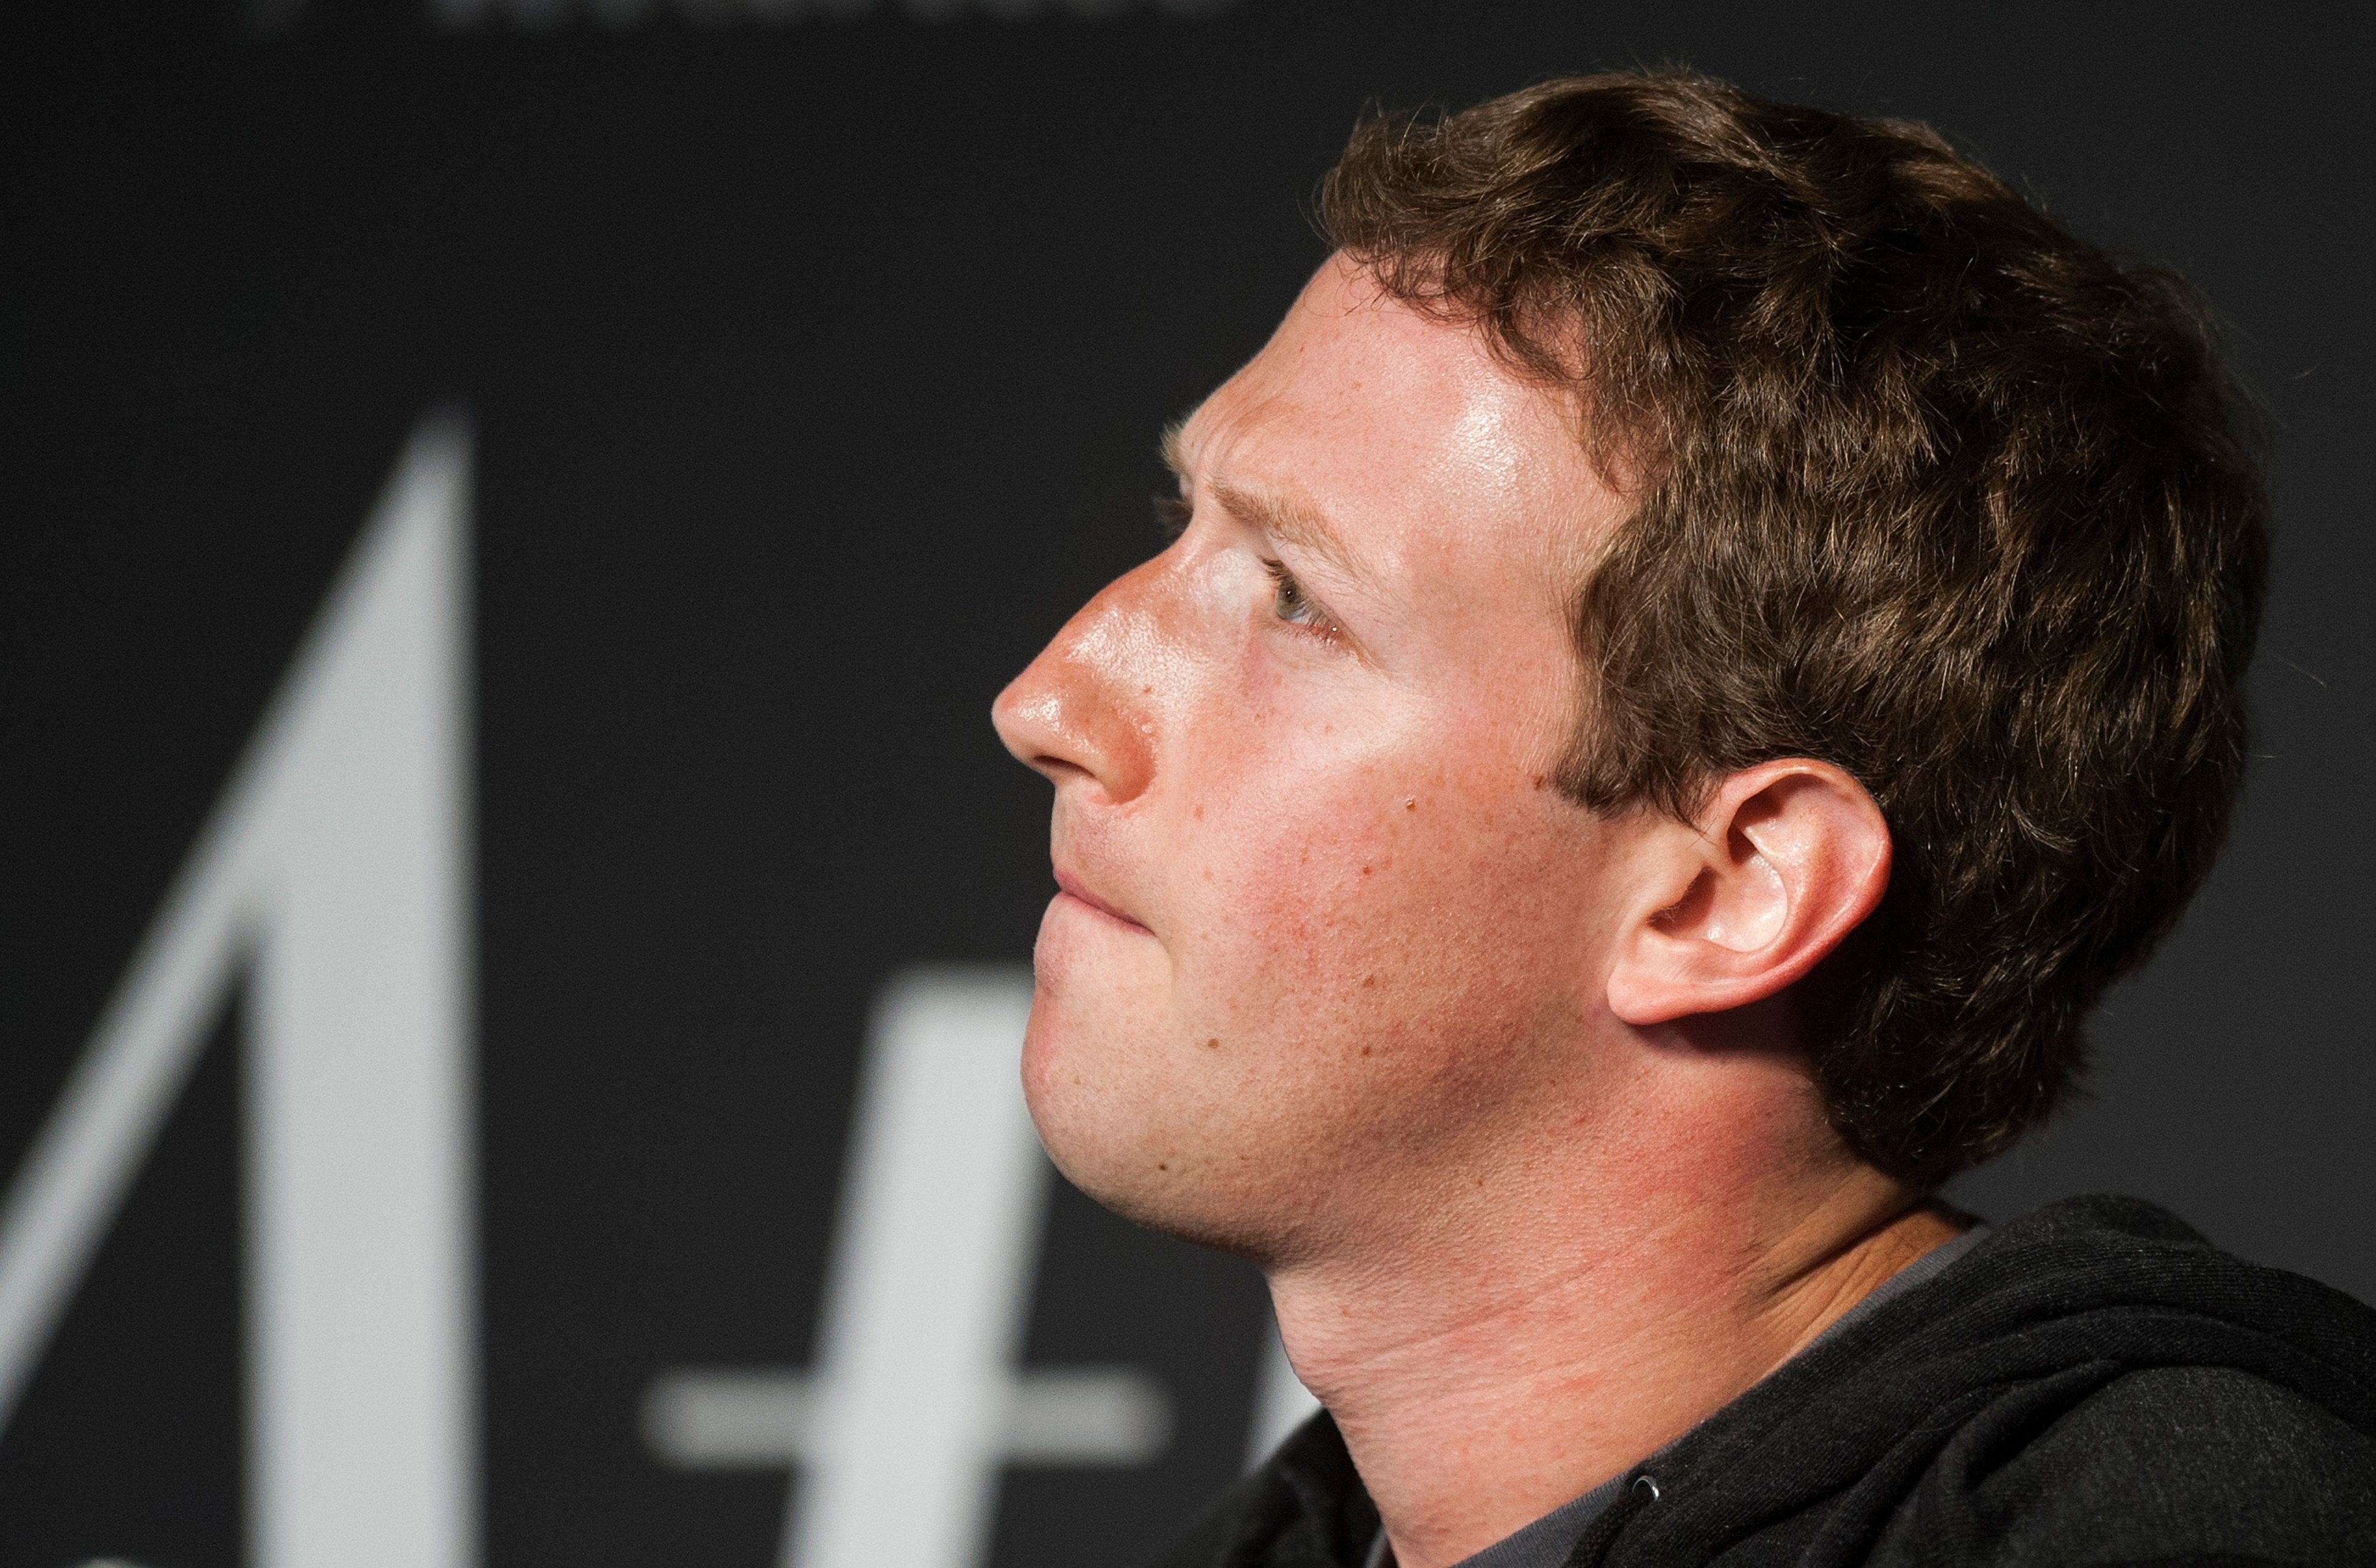 Facebook founder and CEO Mark Zuckerberg acknowledged on March 21 that the company had made “mistakes” and needs to “step up” to fix the problem of data protection in the aftermath of the Cambridge Analytica scandal. Photo: AFP